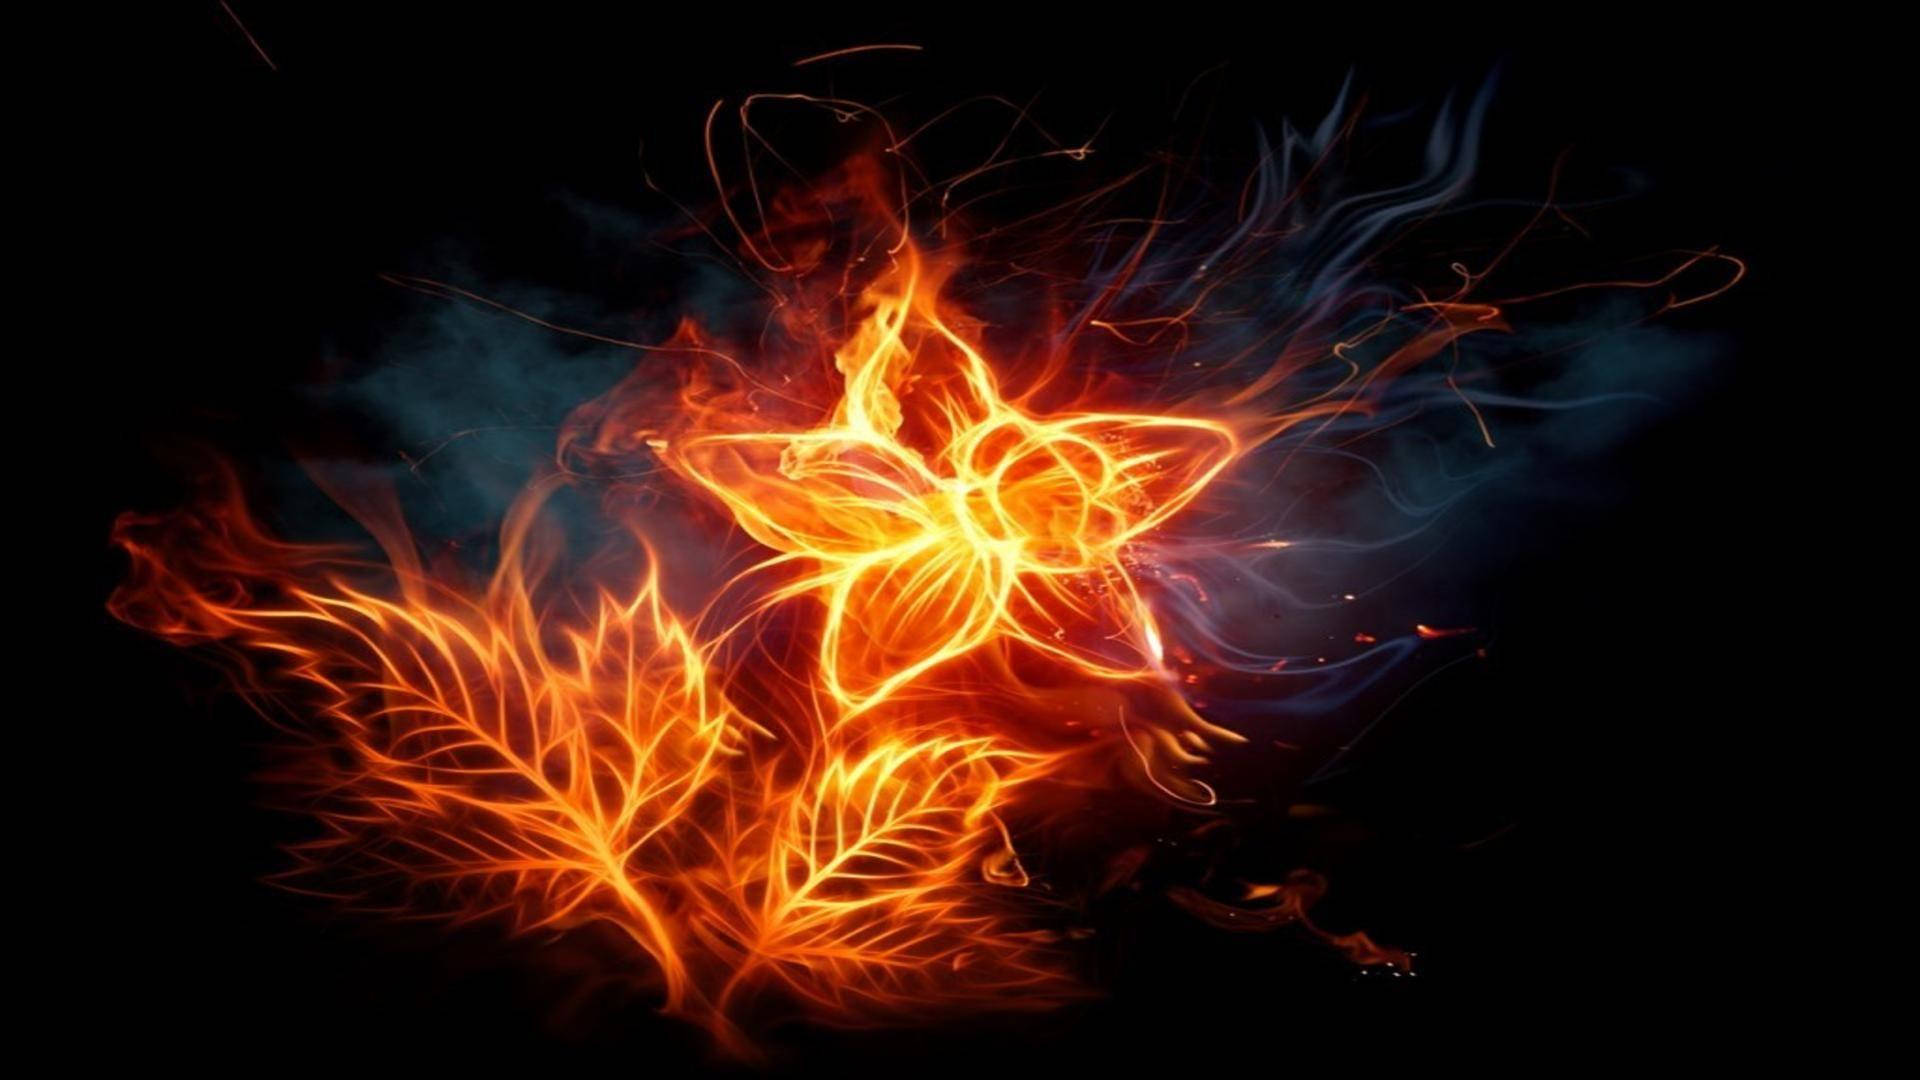 Flower With Leaves Fire Background Wallpaper